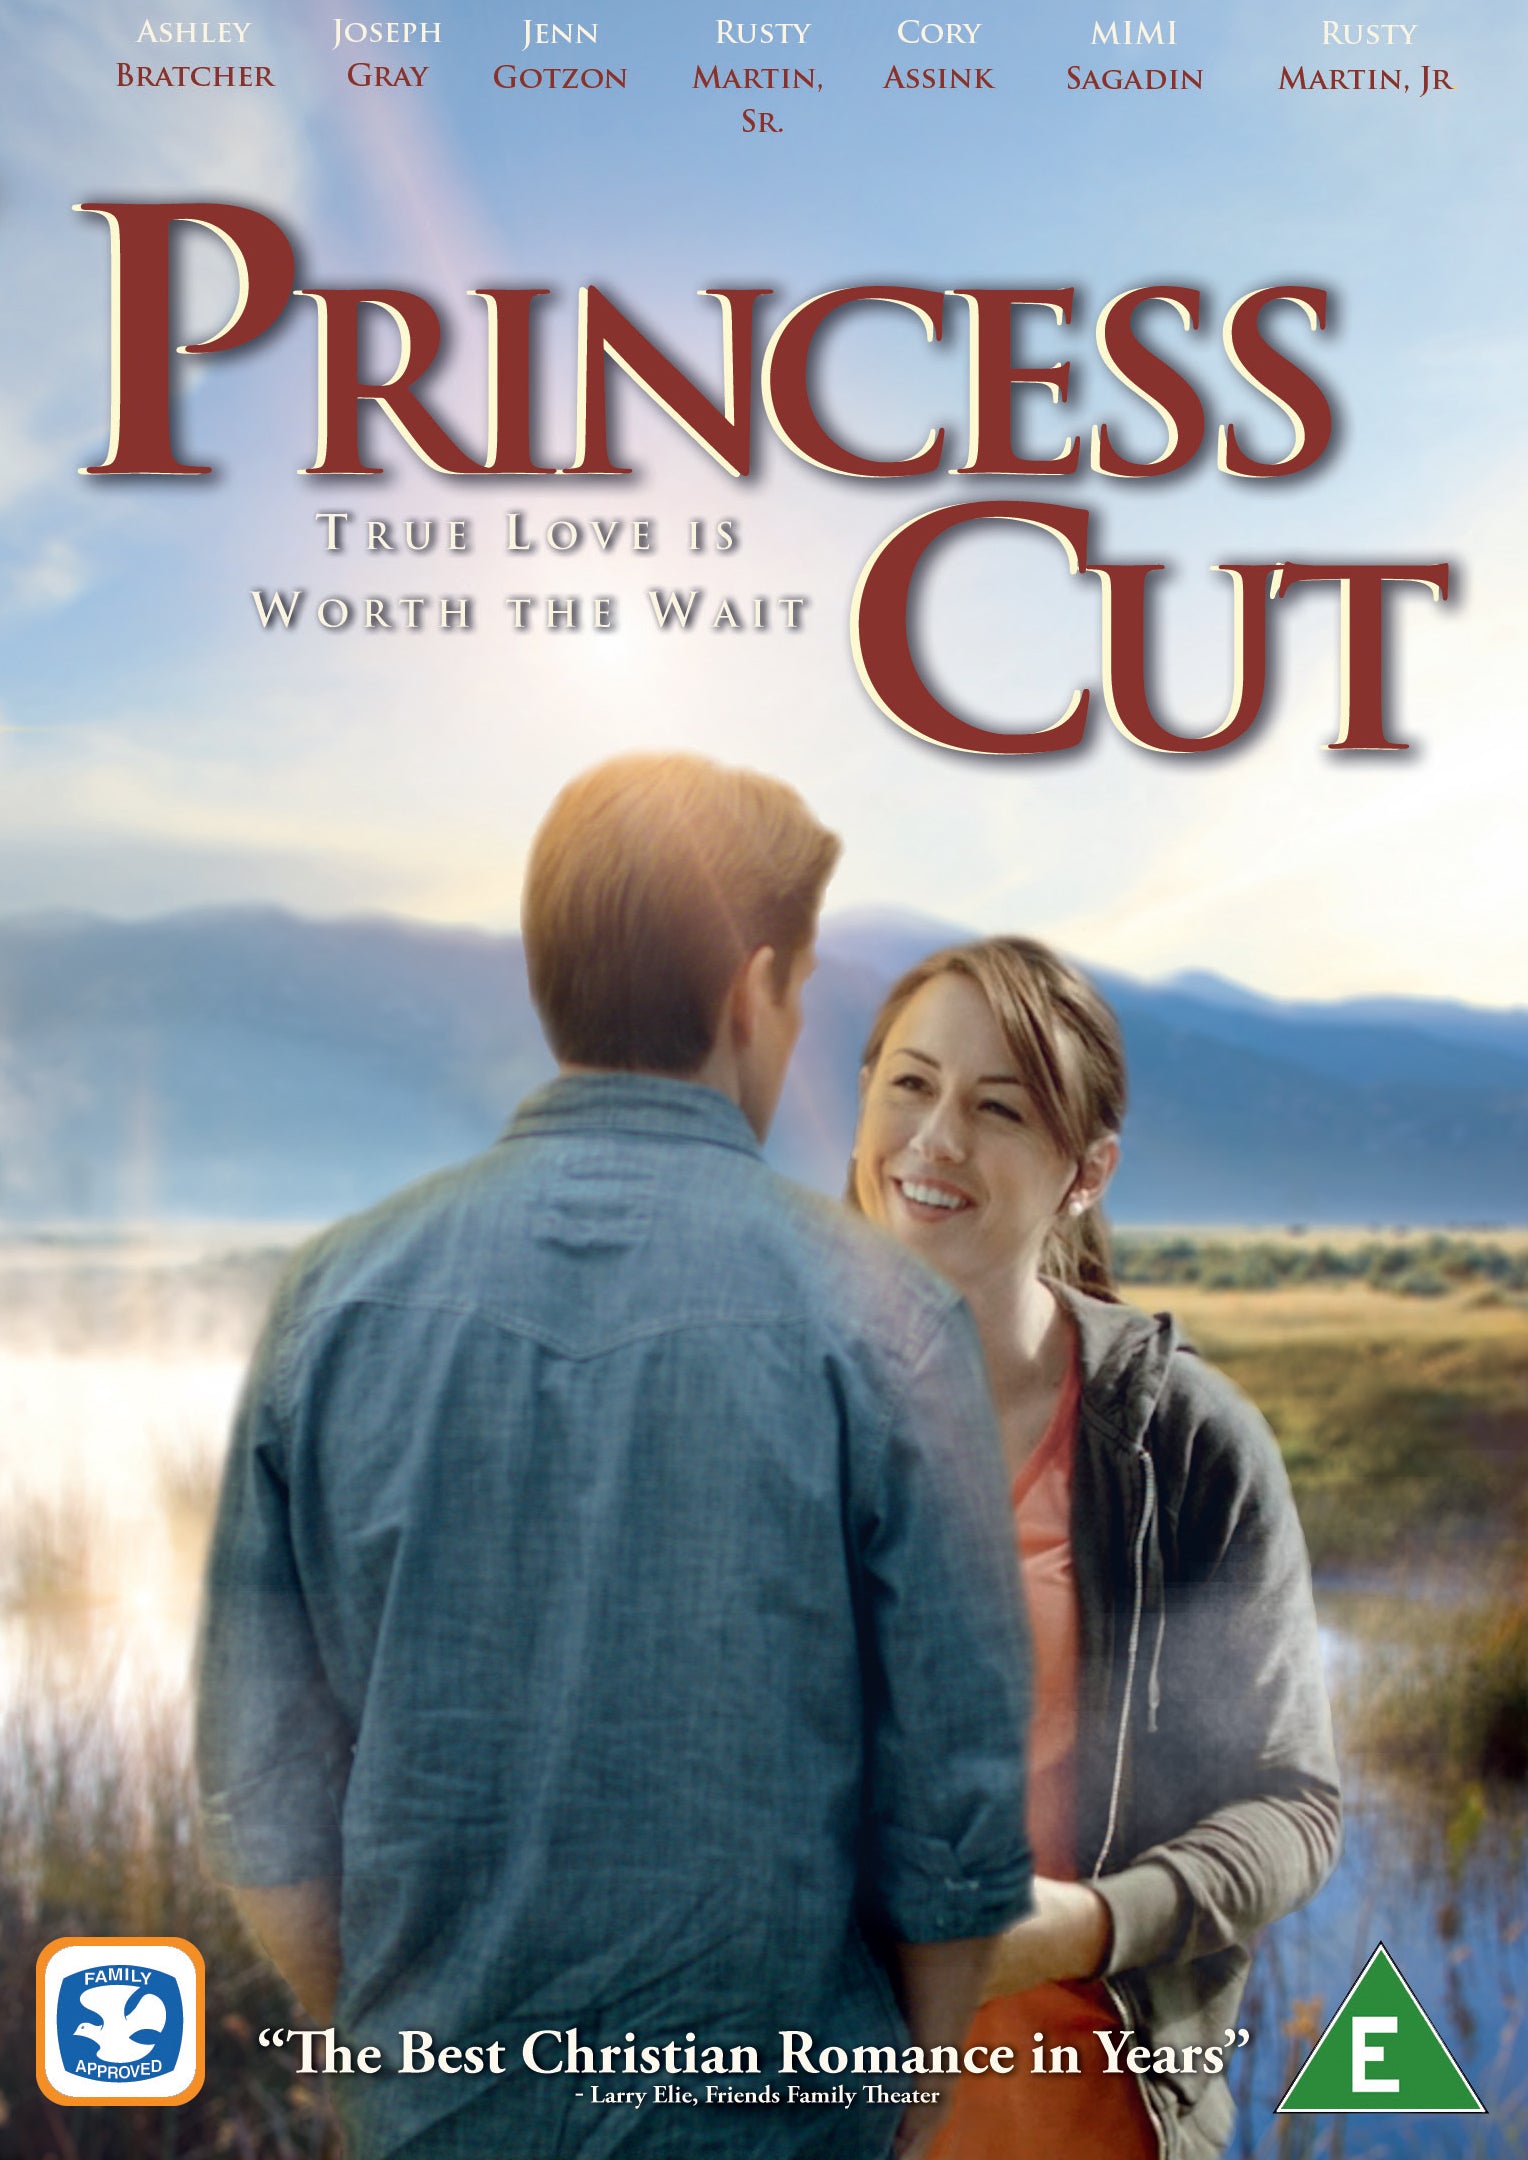 Image of Princess Cut DVD other